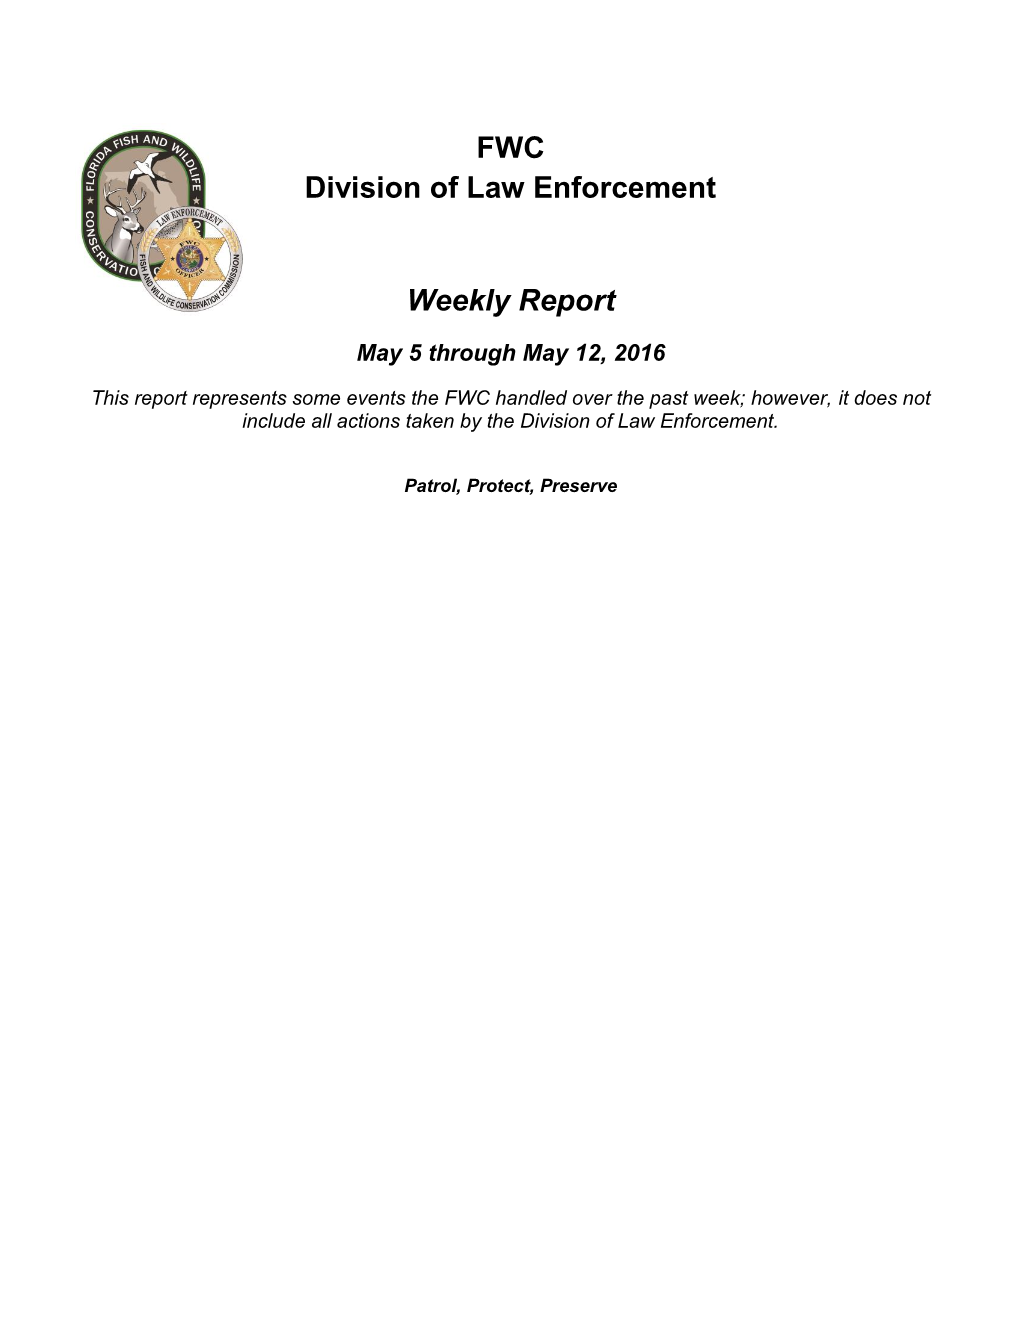 FWC Division of Law Enforcement Weekly Report